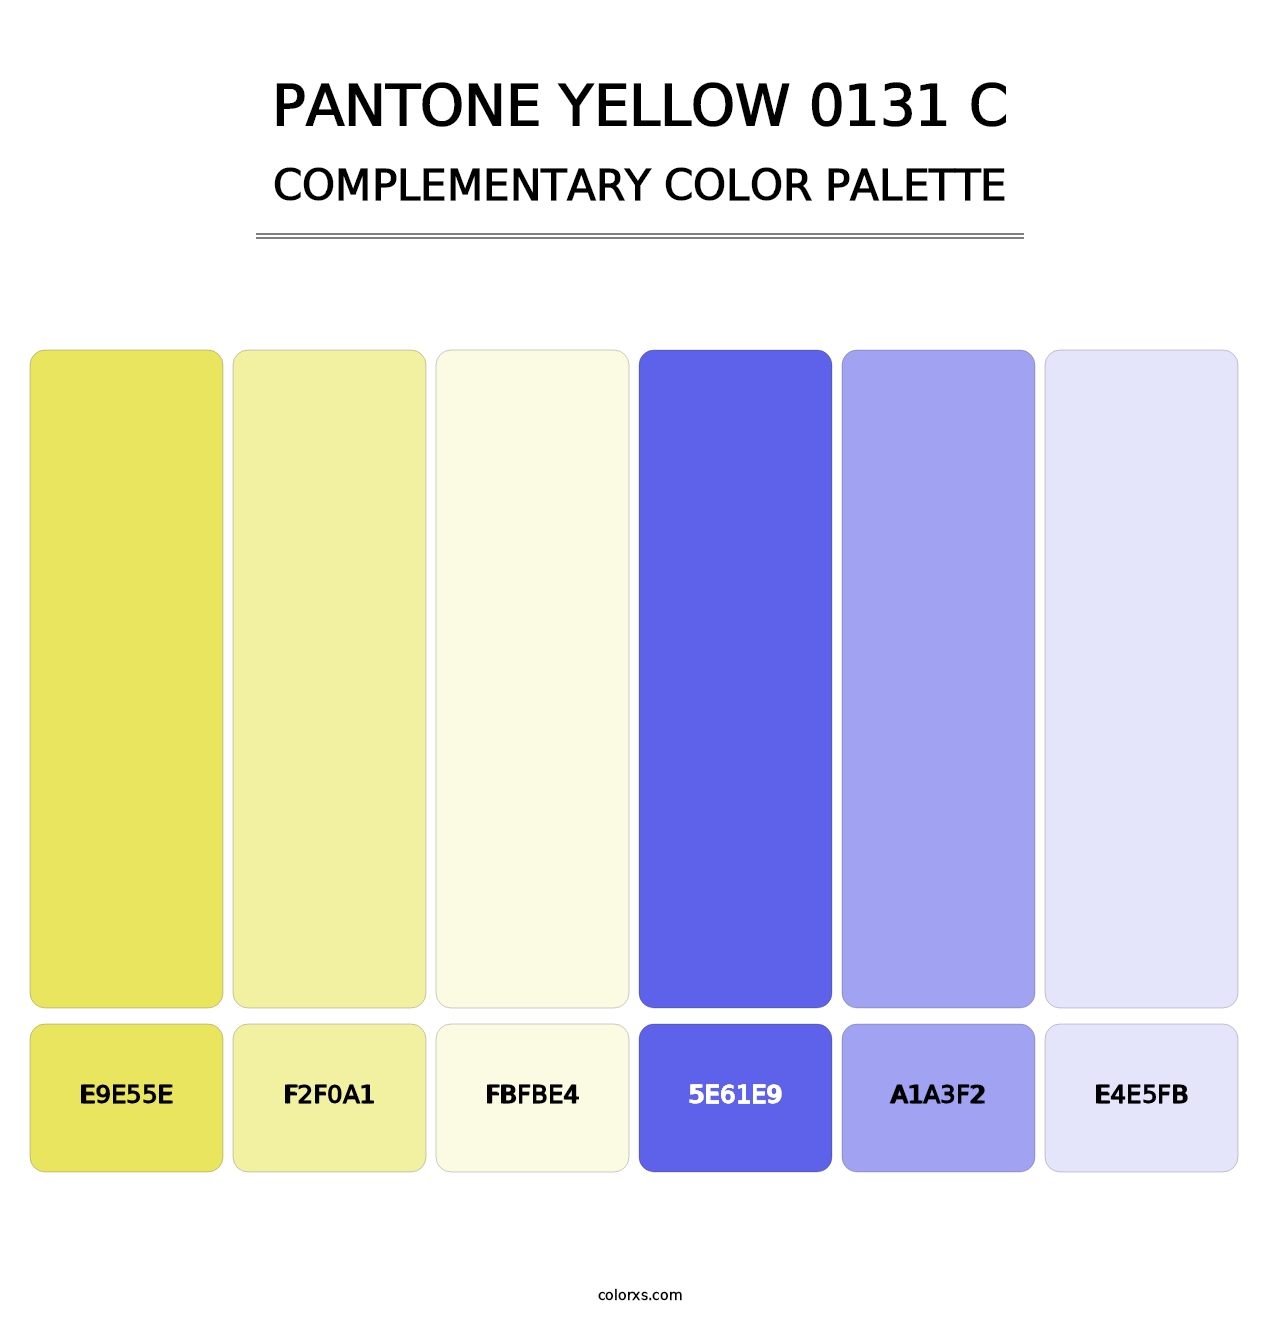 PANTONE Yellow 0131 C - Complementary Color Palette